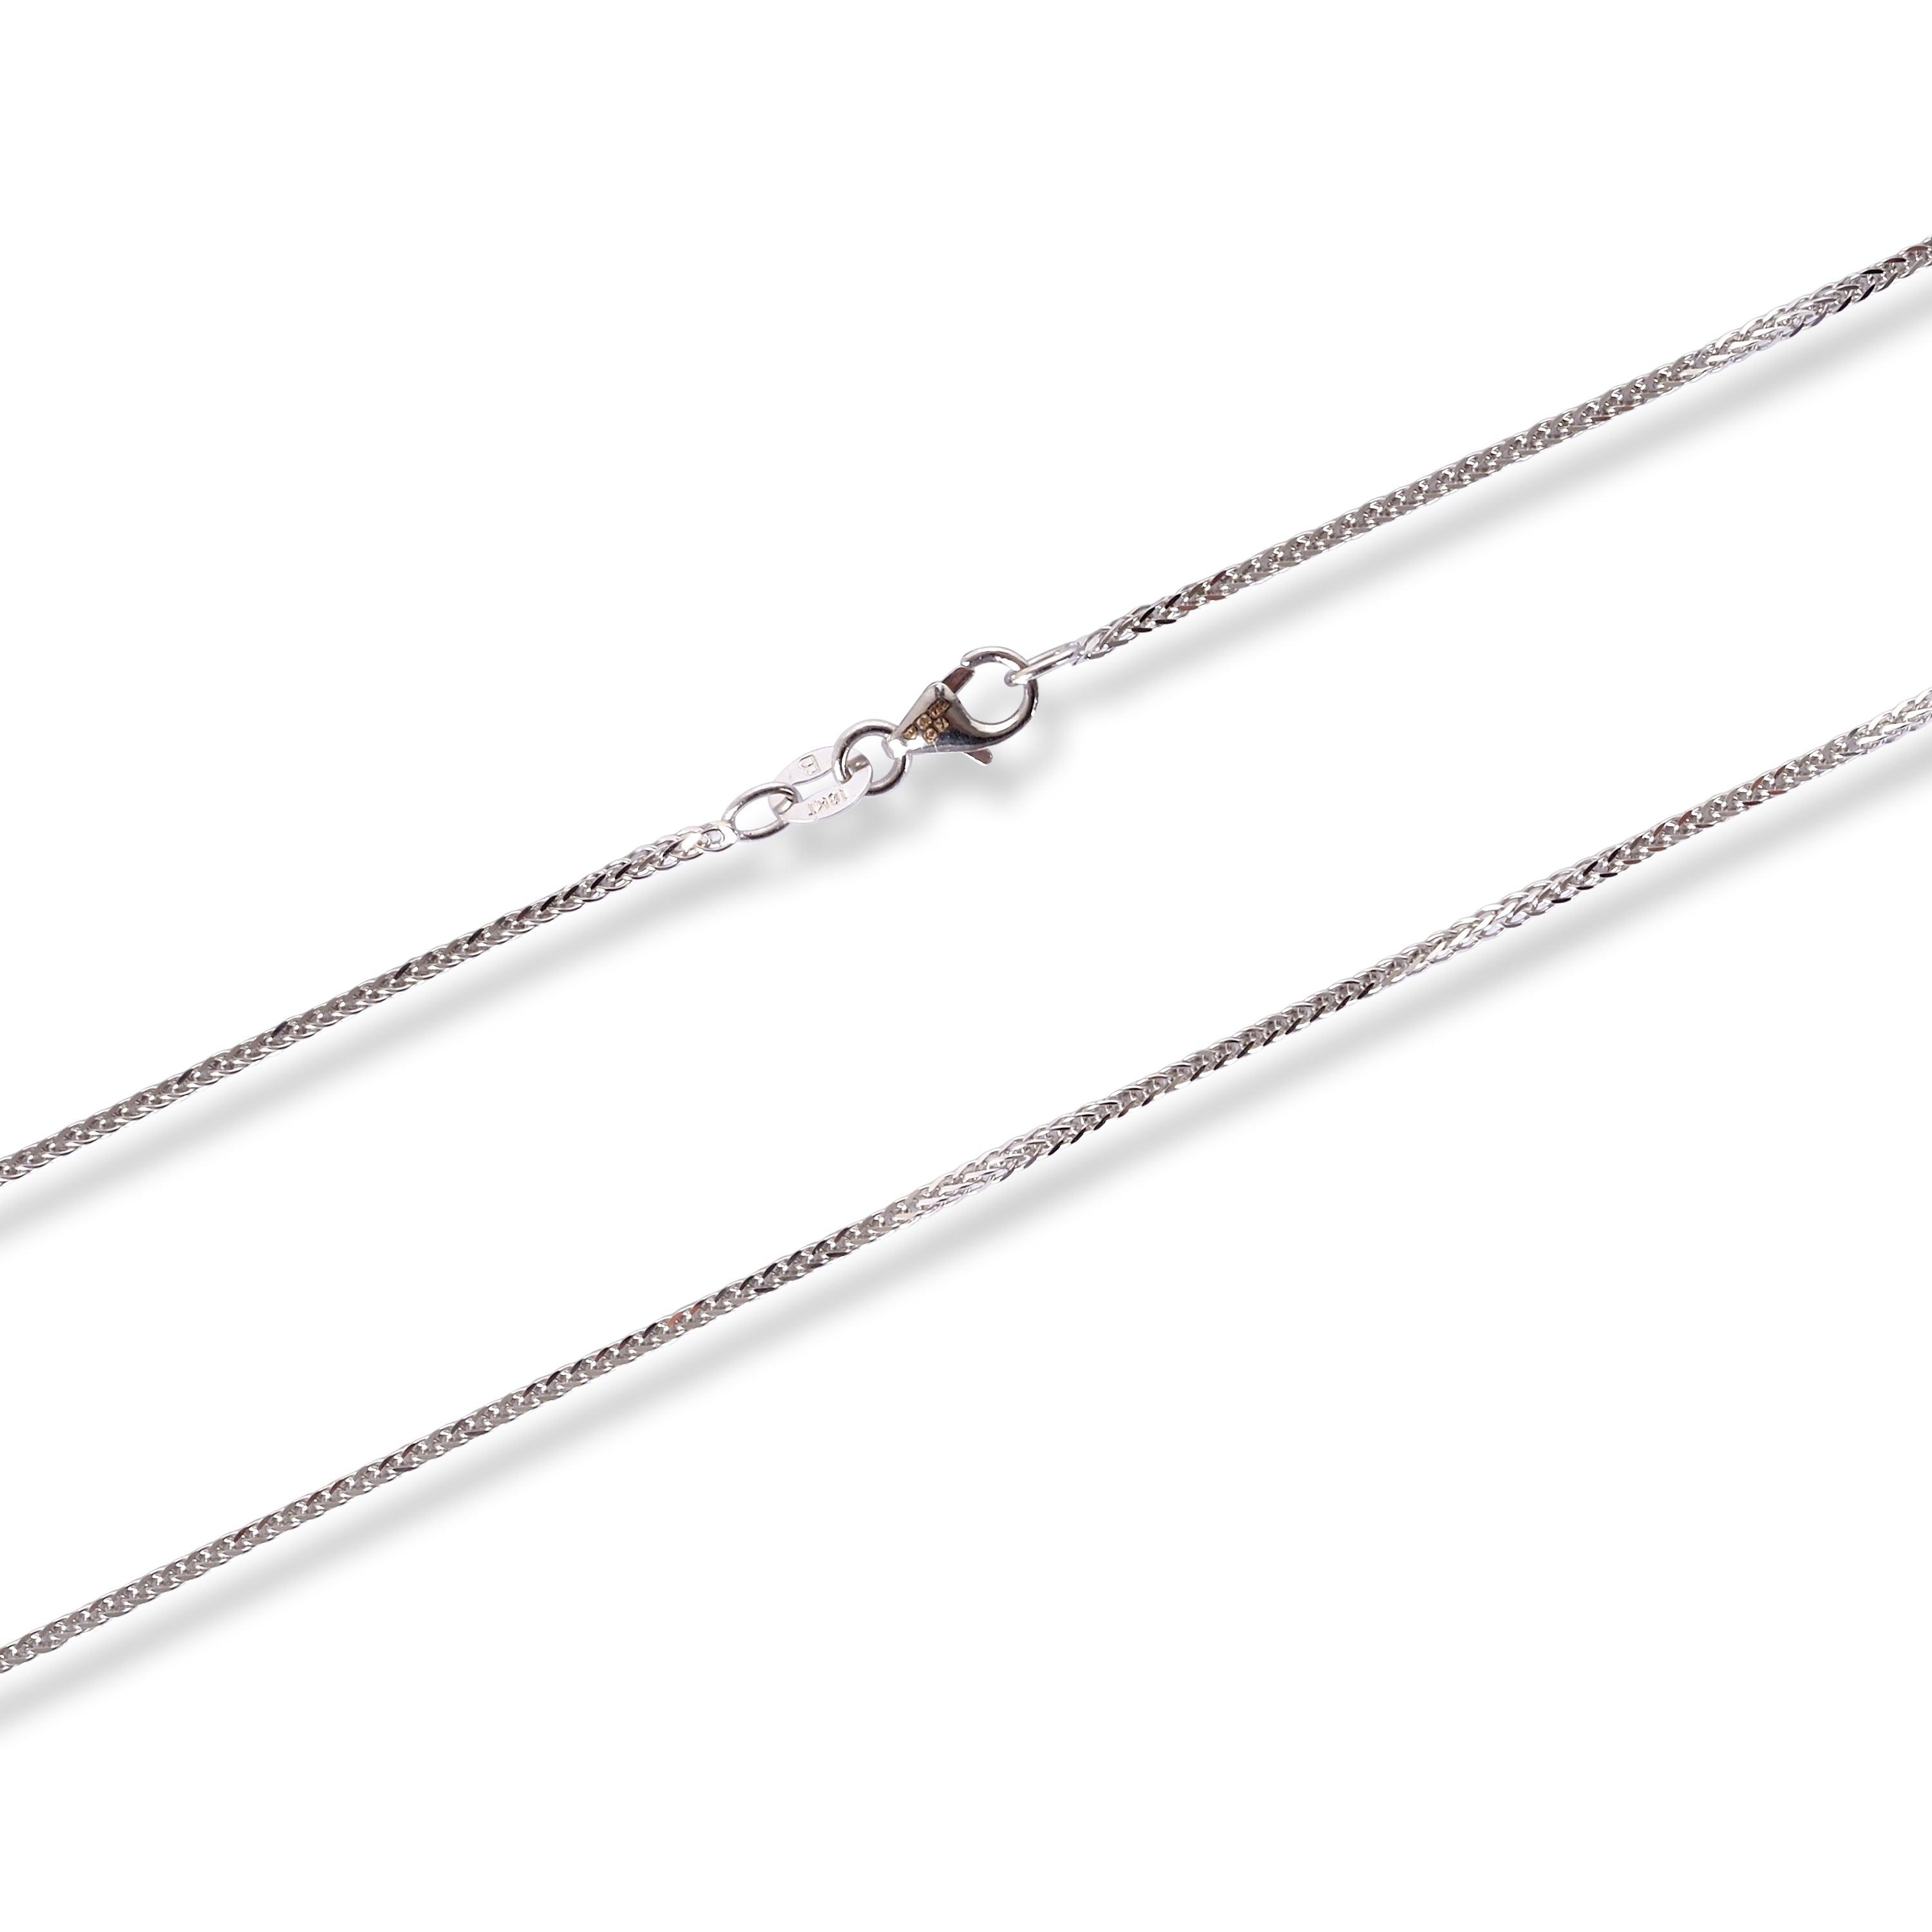 18ct White Gold Foxtail Chain with Lobster Clasp C-3803 - Minar Jewellers